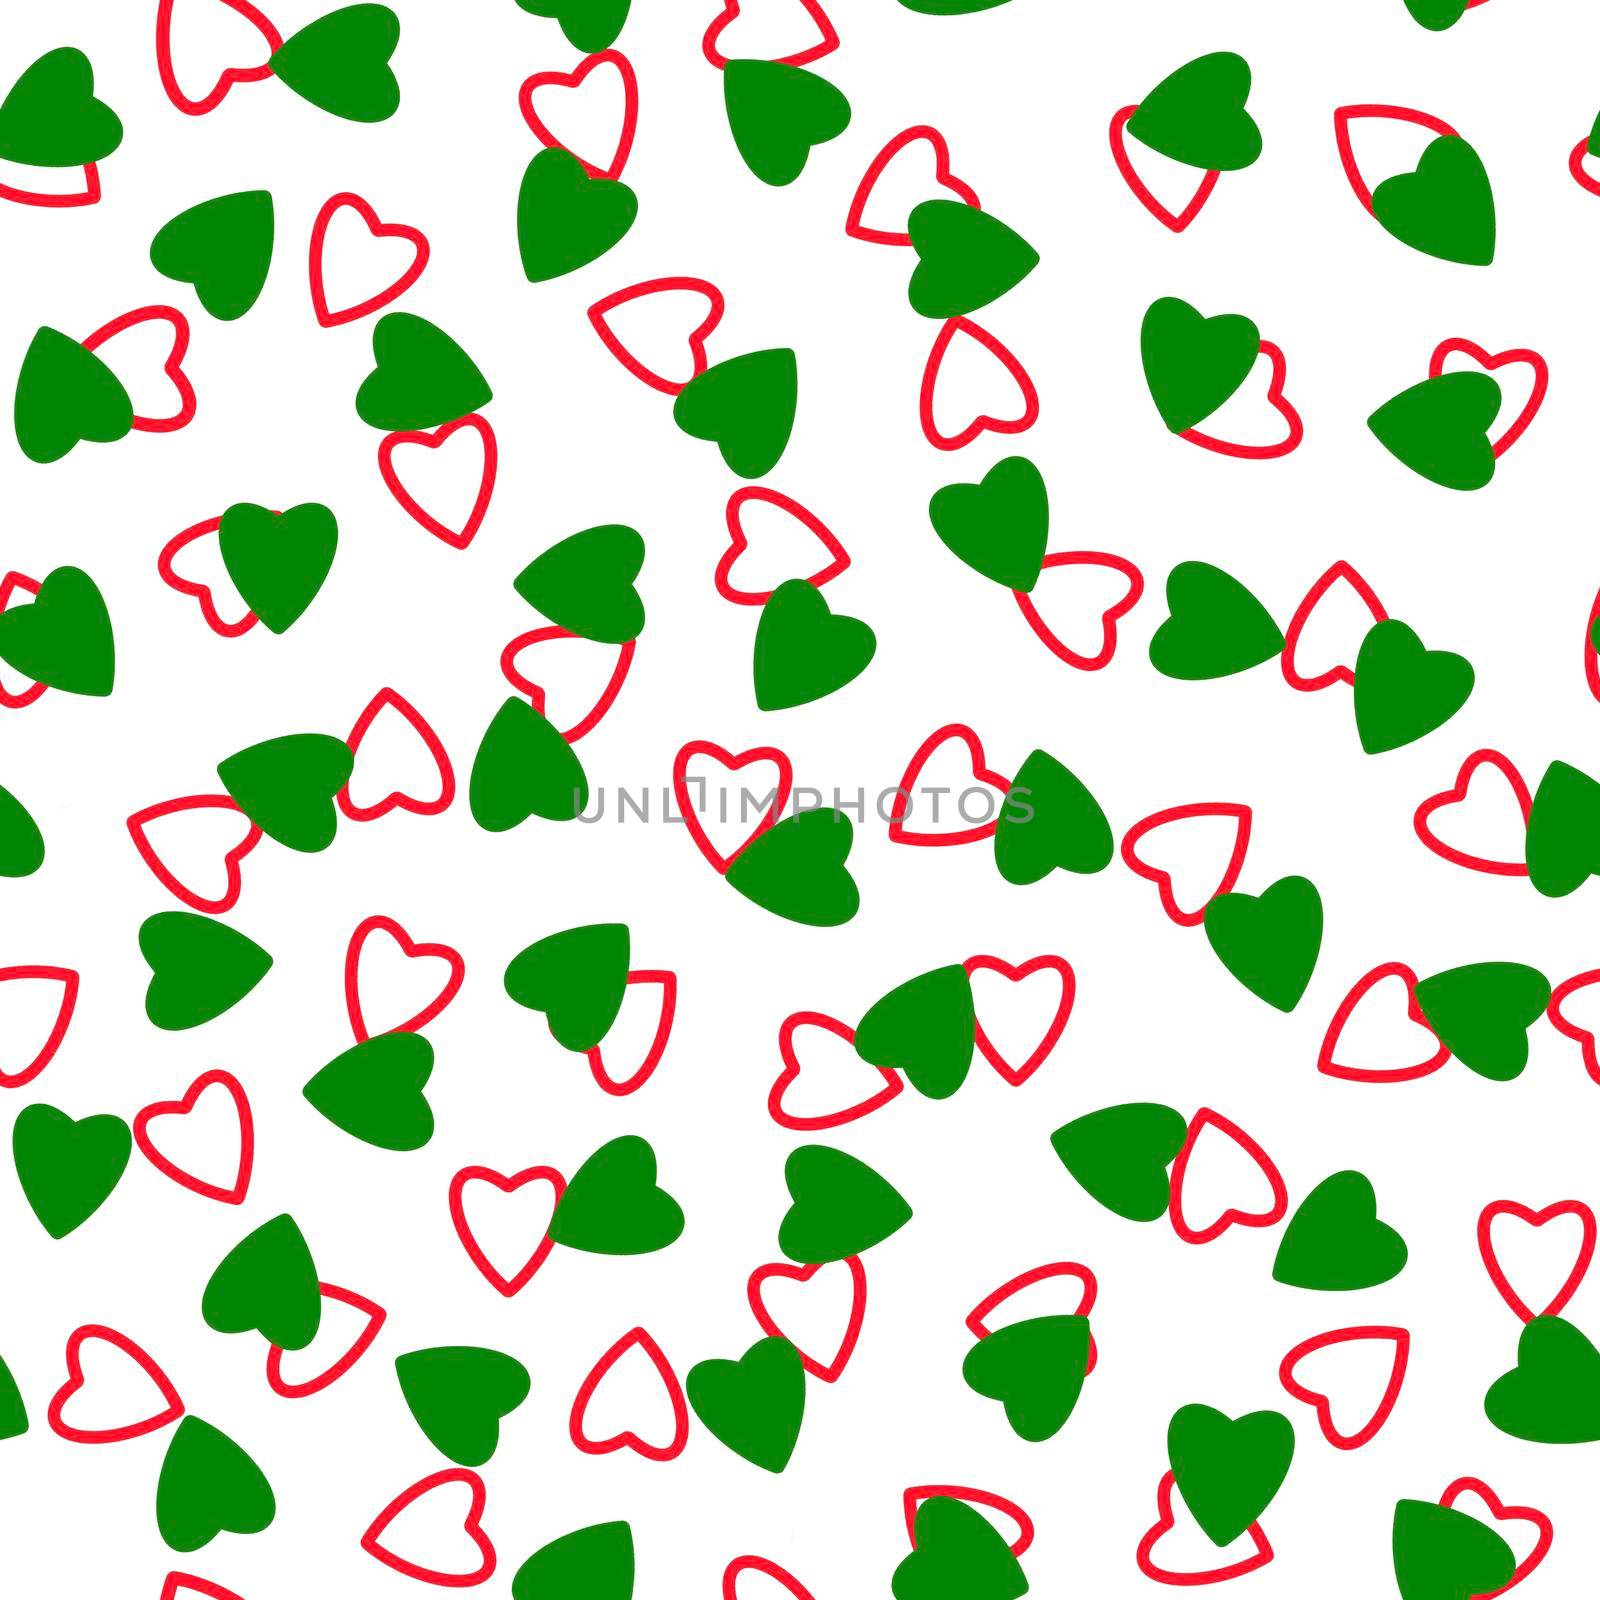 Simple hearts seamless pattern,endless chaotic texture made of tiny heart silhouettes.Valentines,mothers day background.Great for Easter,wedding,scrapbook,gift wrapping paper,textiles.Green,red,white by Angelsmoon